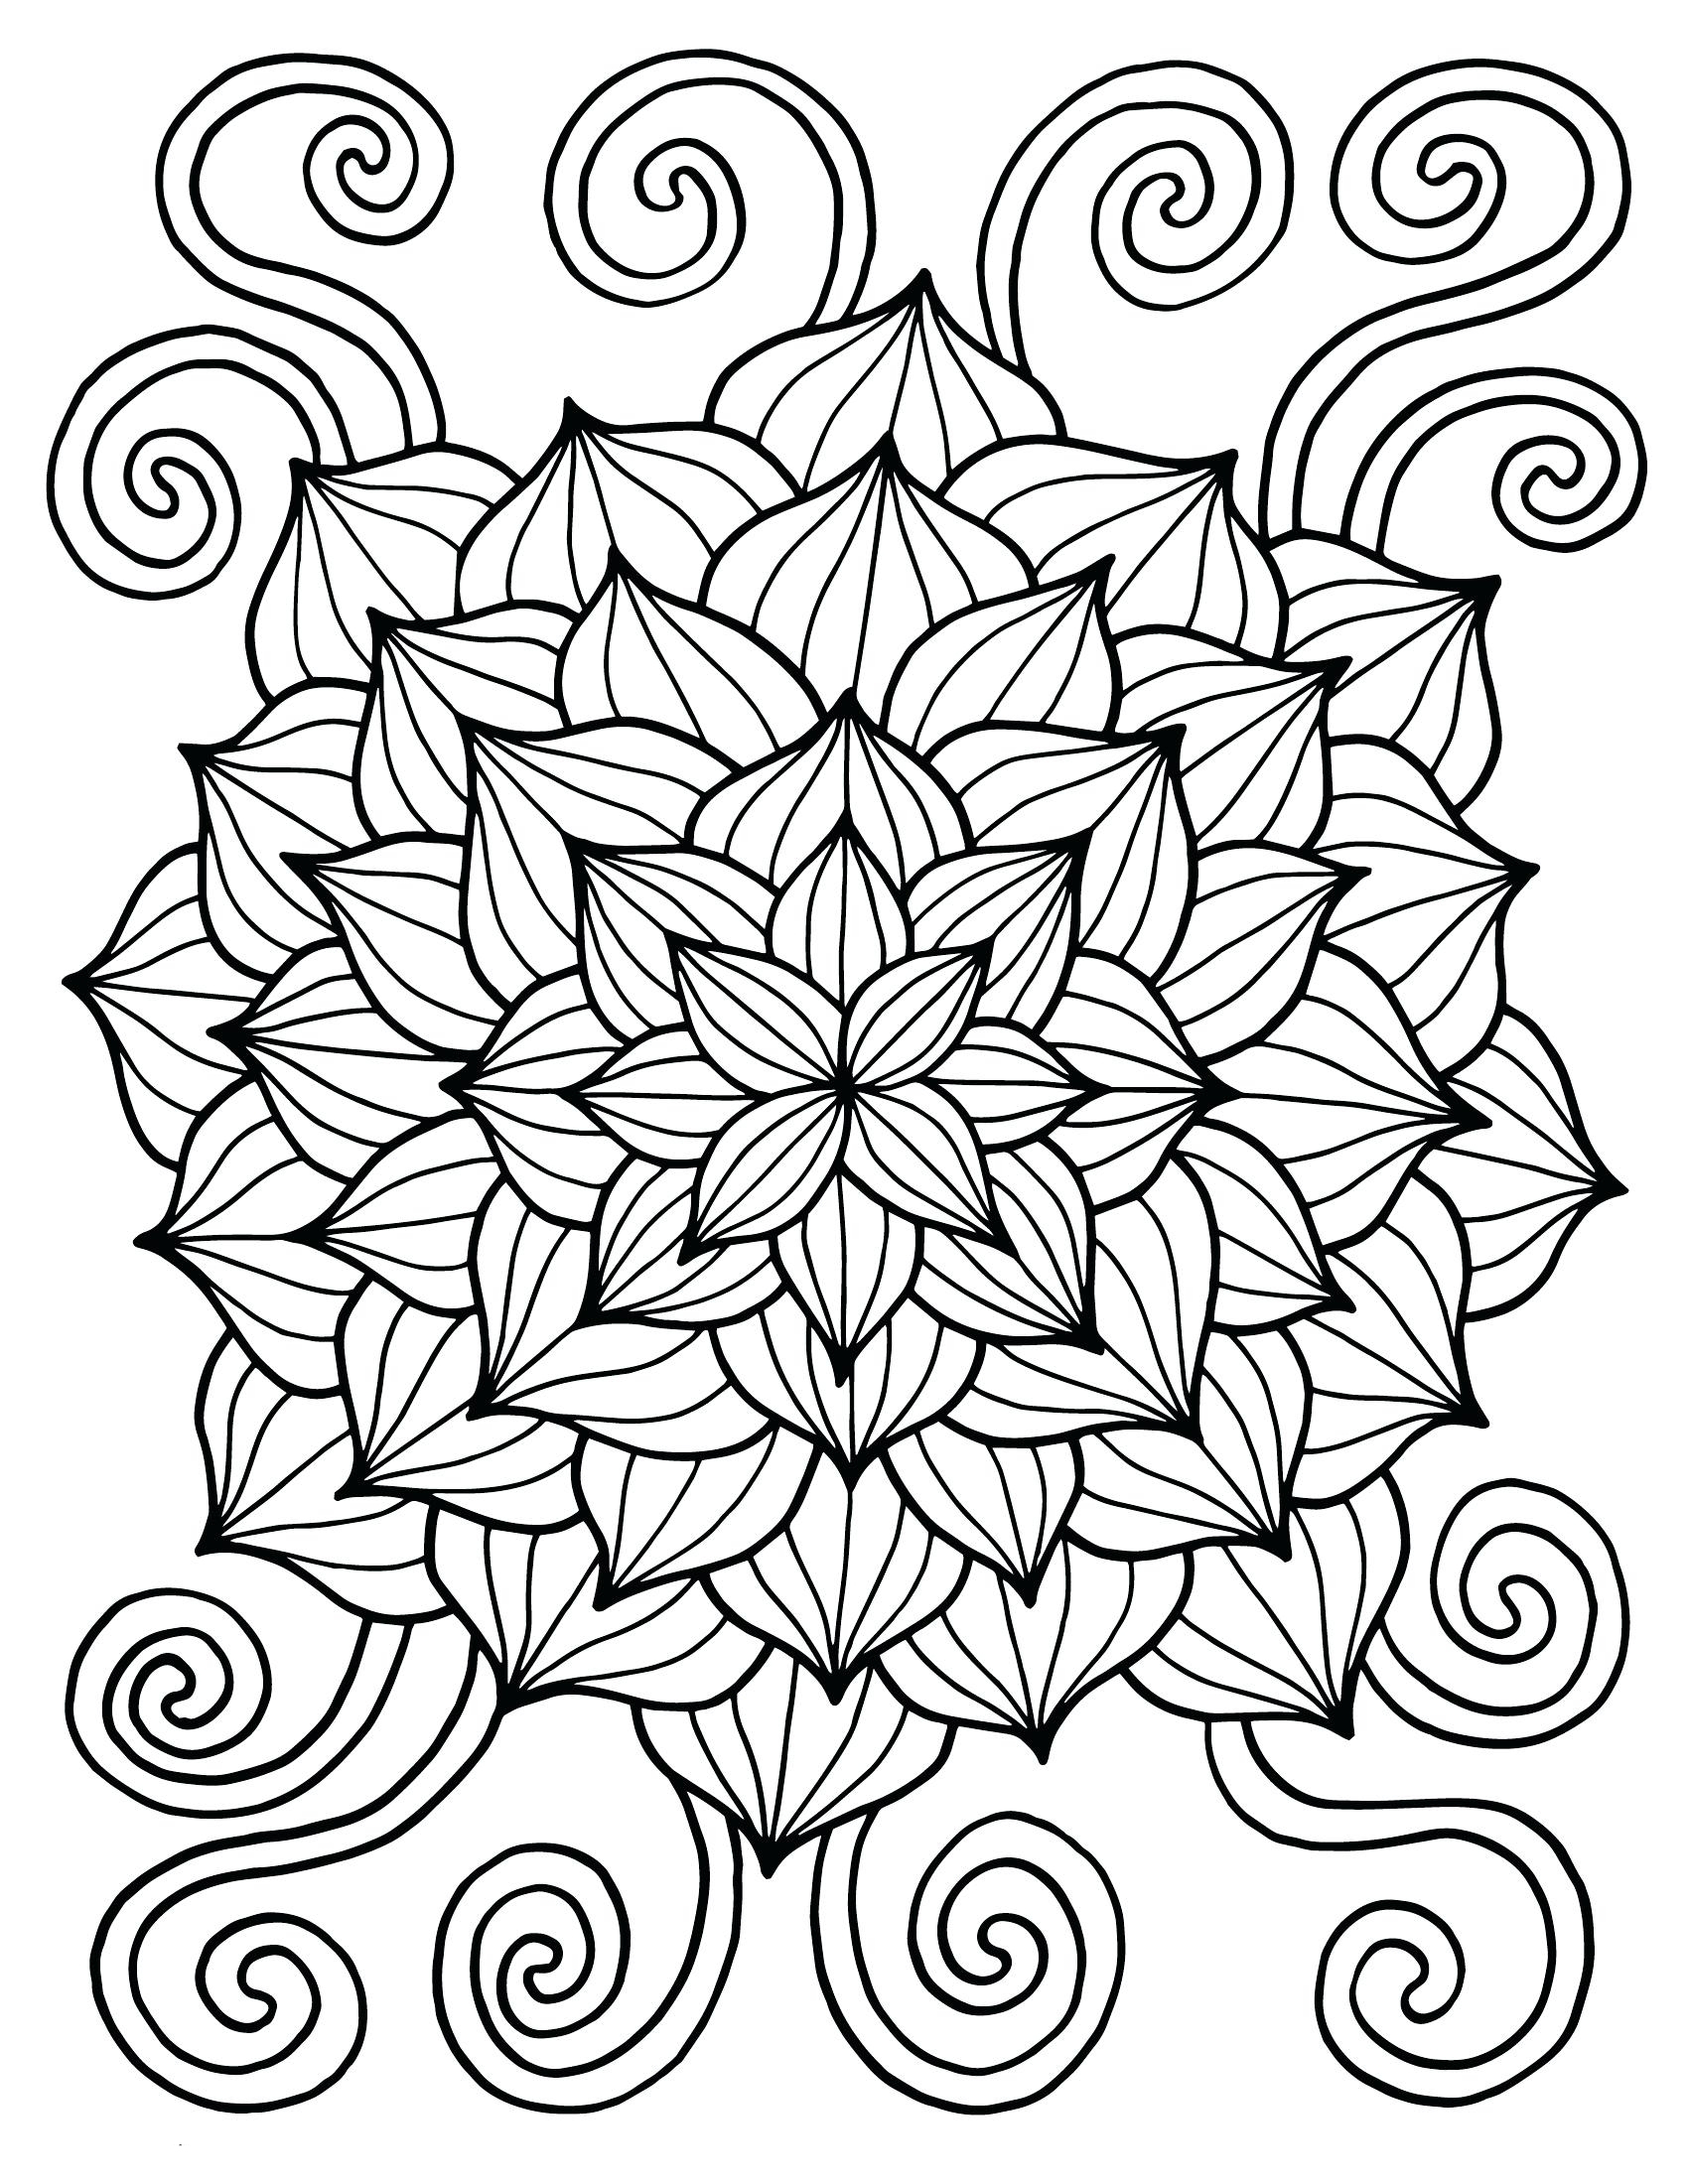 Paper Snowflake Templates - Free Printable Templates & 35+ Spring Coloring Pages Printable